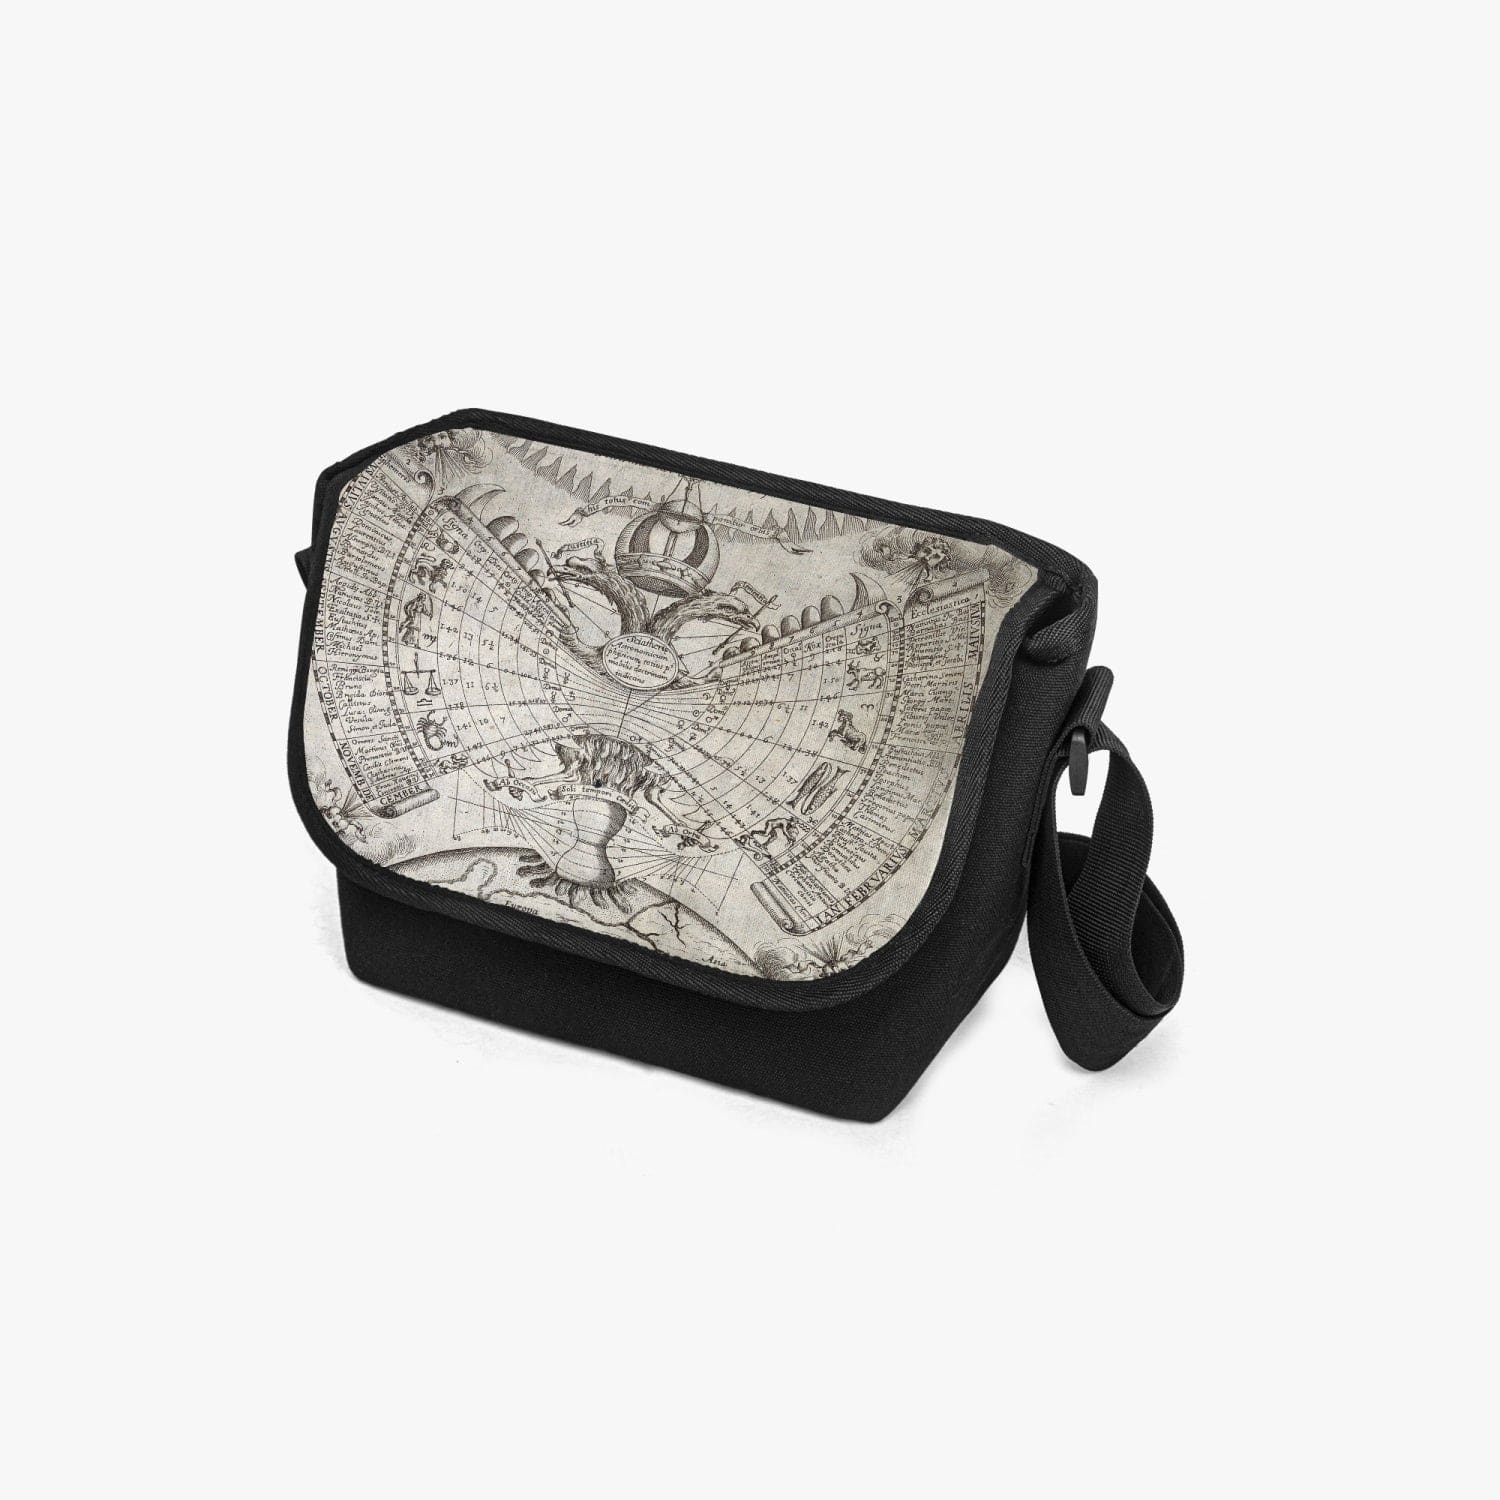 Engraving by P. Miotte dated 1646 is the source of the print on this practical, unisex Messenger bag at Gallery Serpentine 2